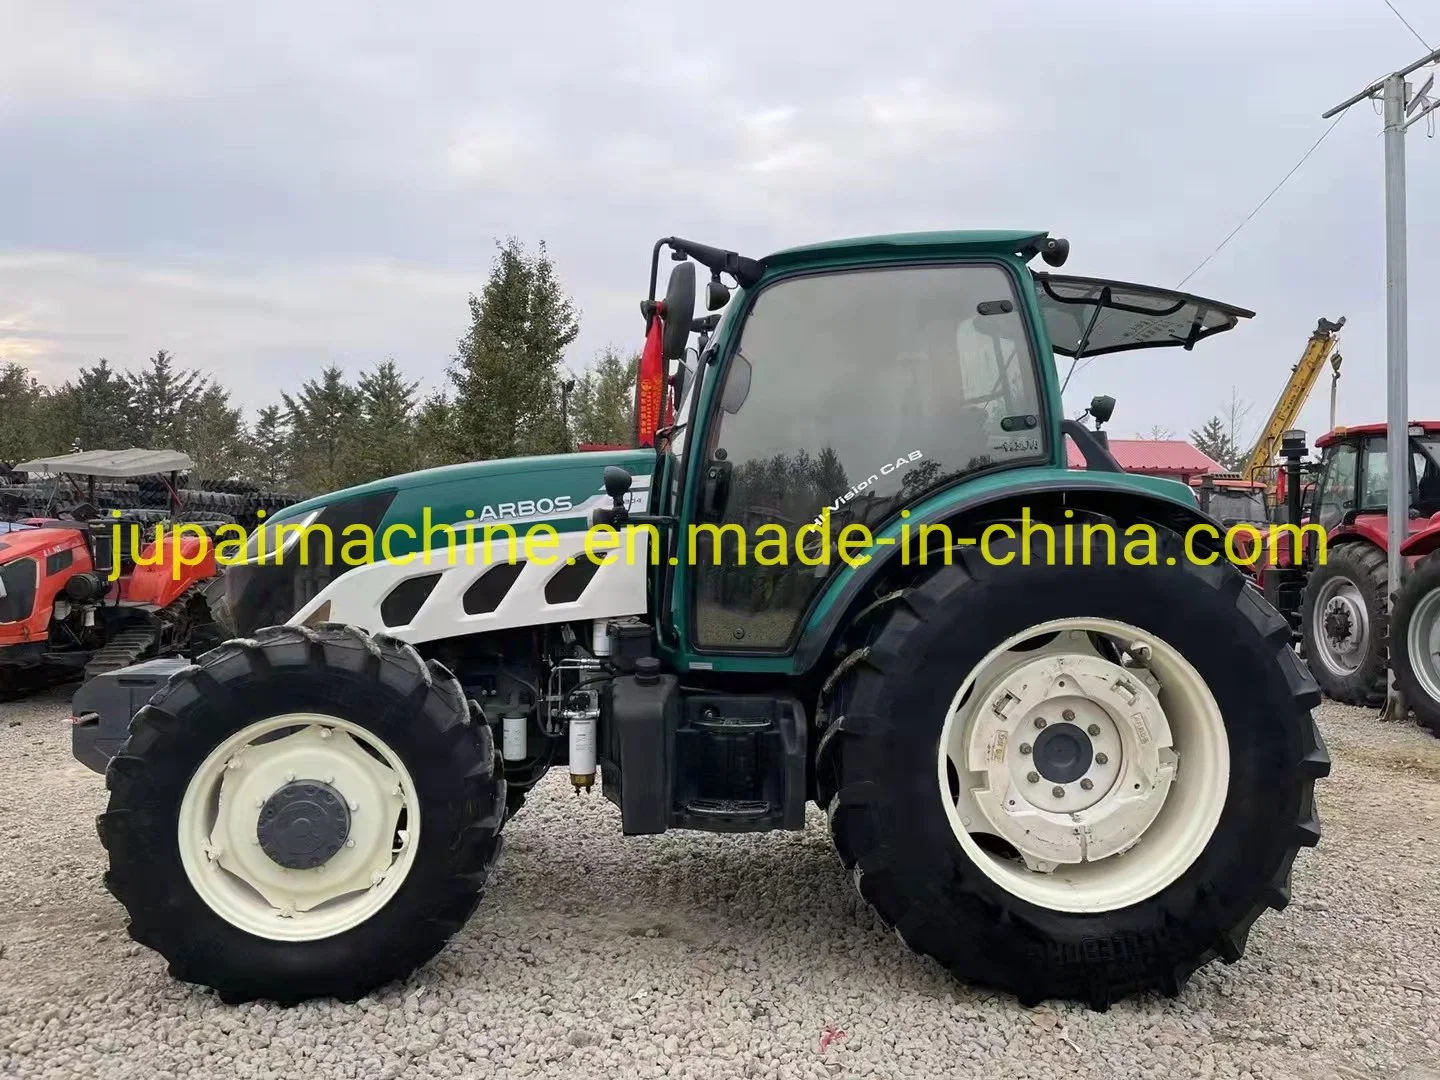 Second Hand Used Arbos 140HP Tractor 4WD Mini Tractor Agriculture Compact Farm Perkins Engine Agricola Arbos Tractor